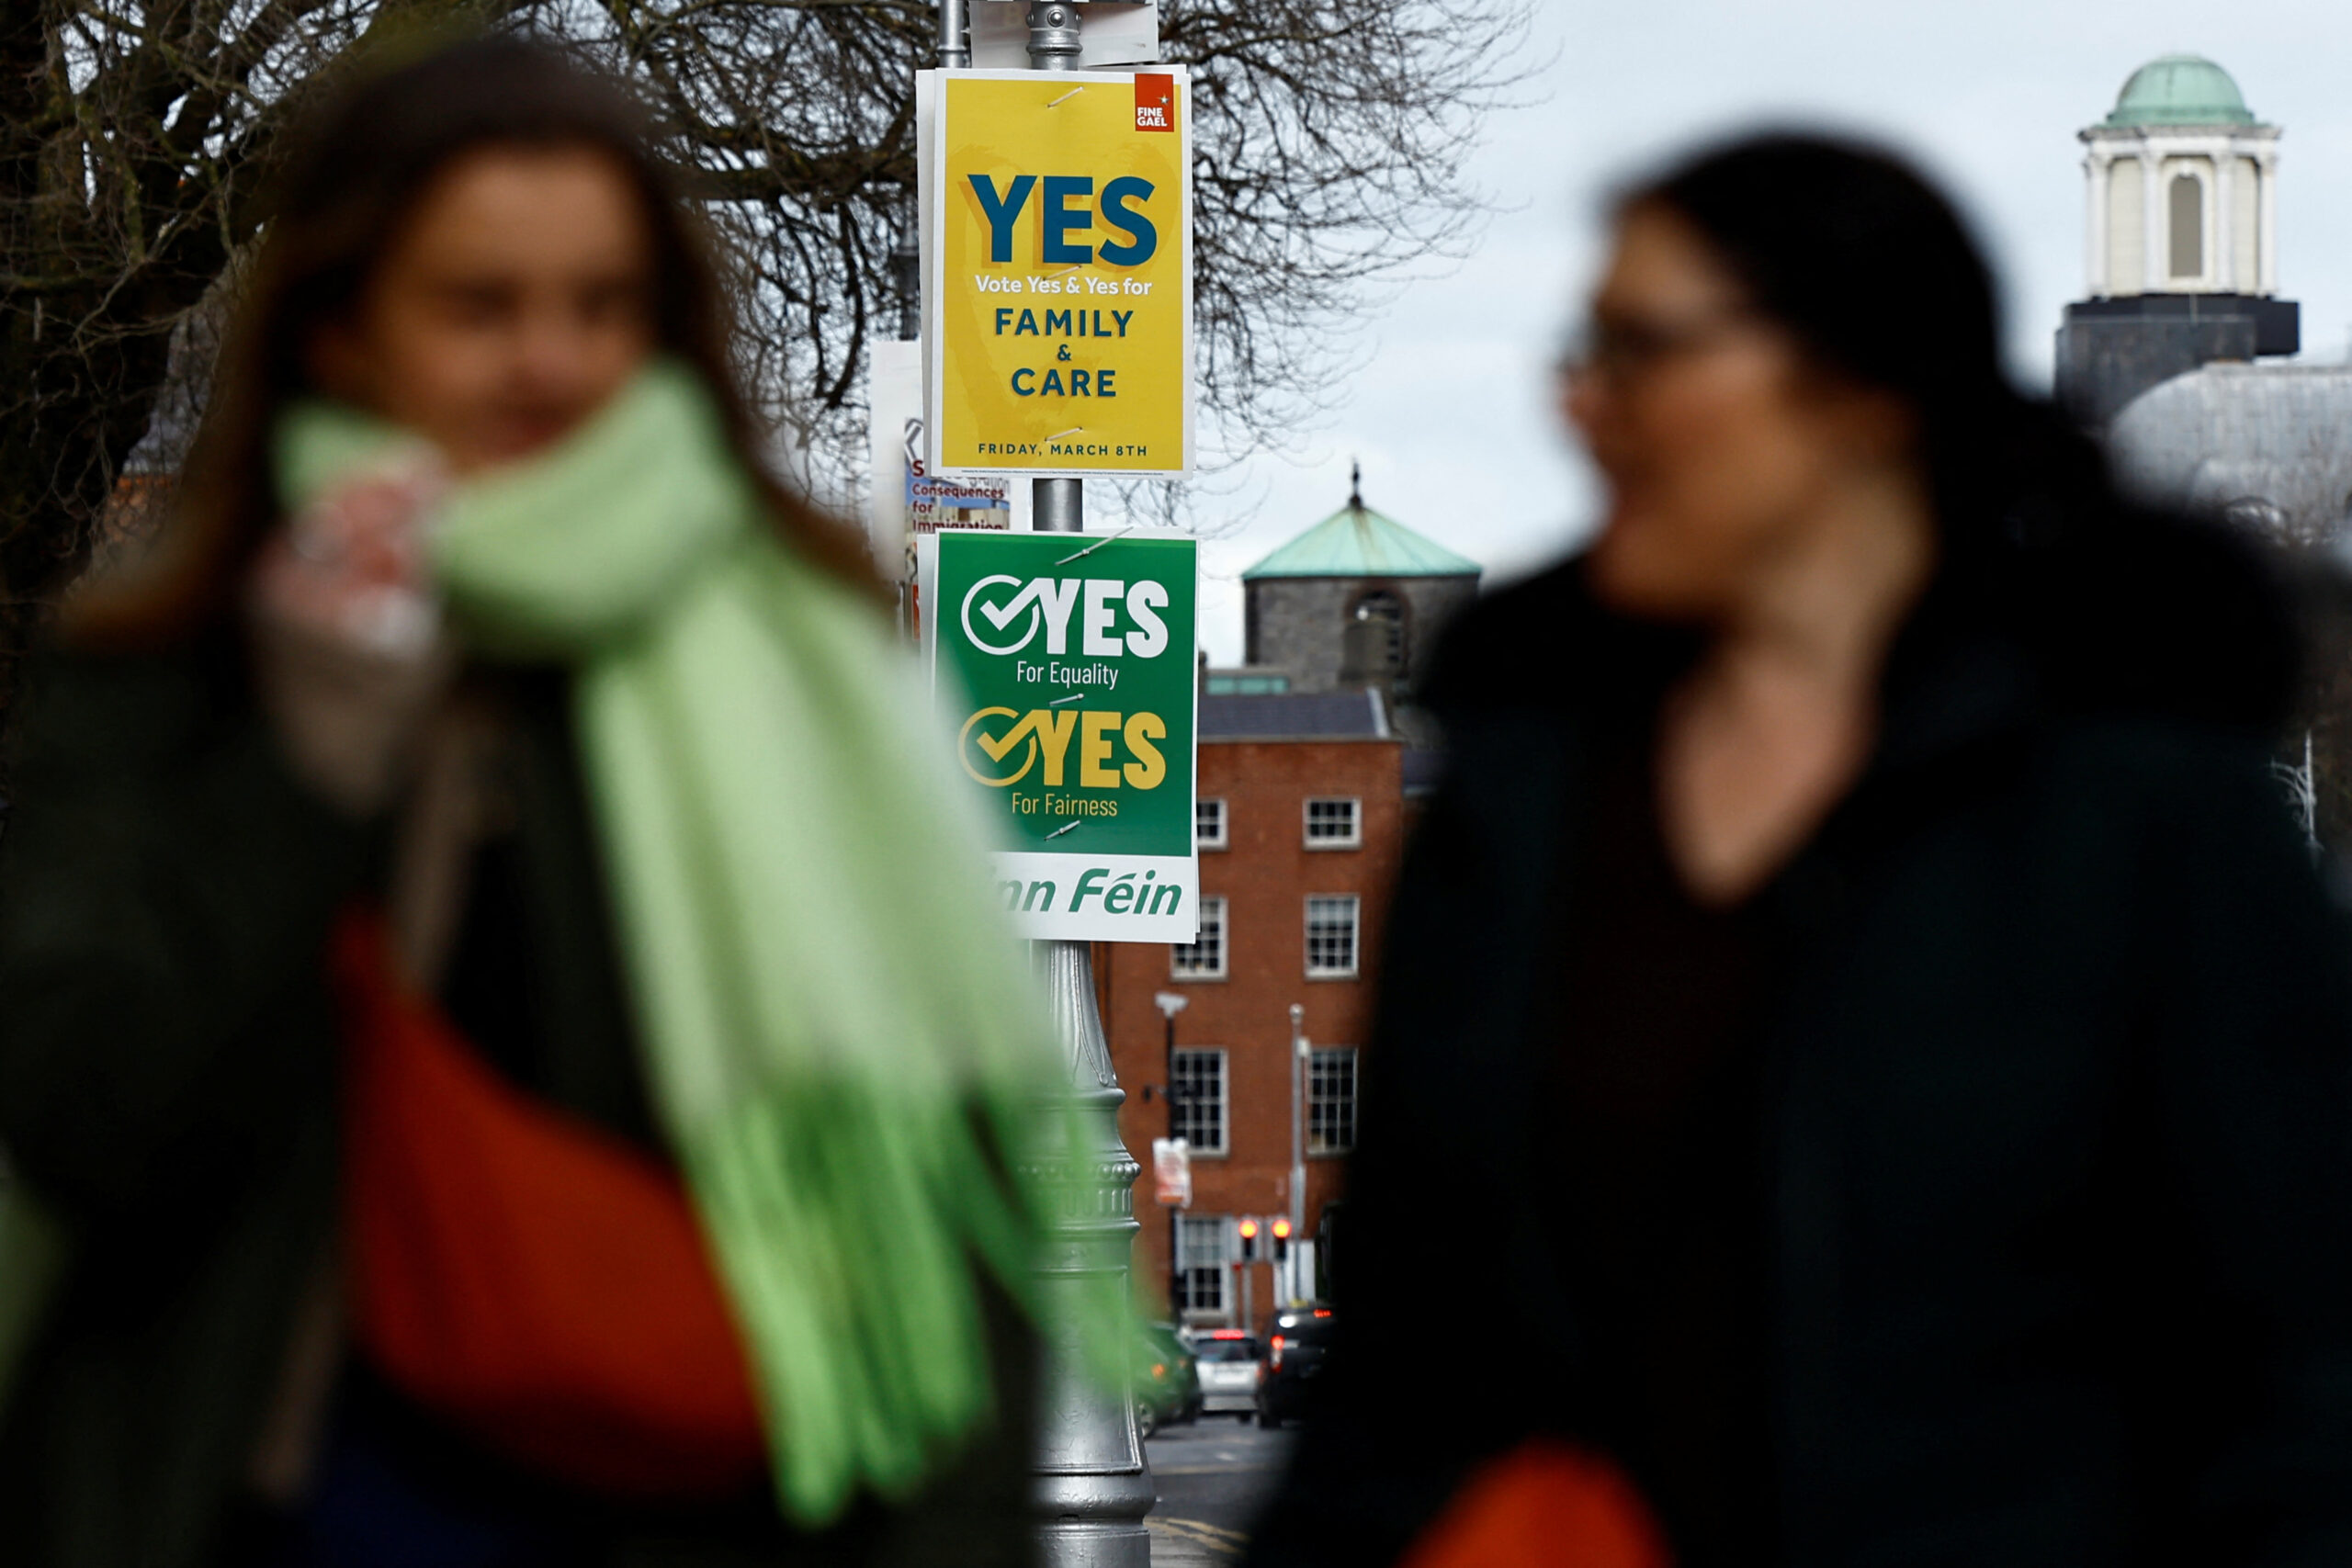 Ireland holds referendums on women’s role, family makeup